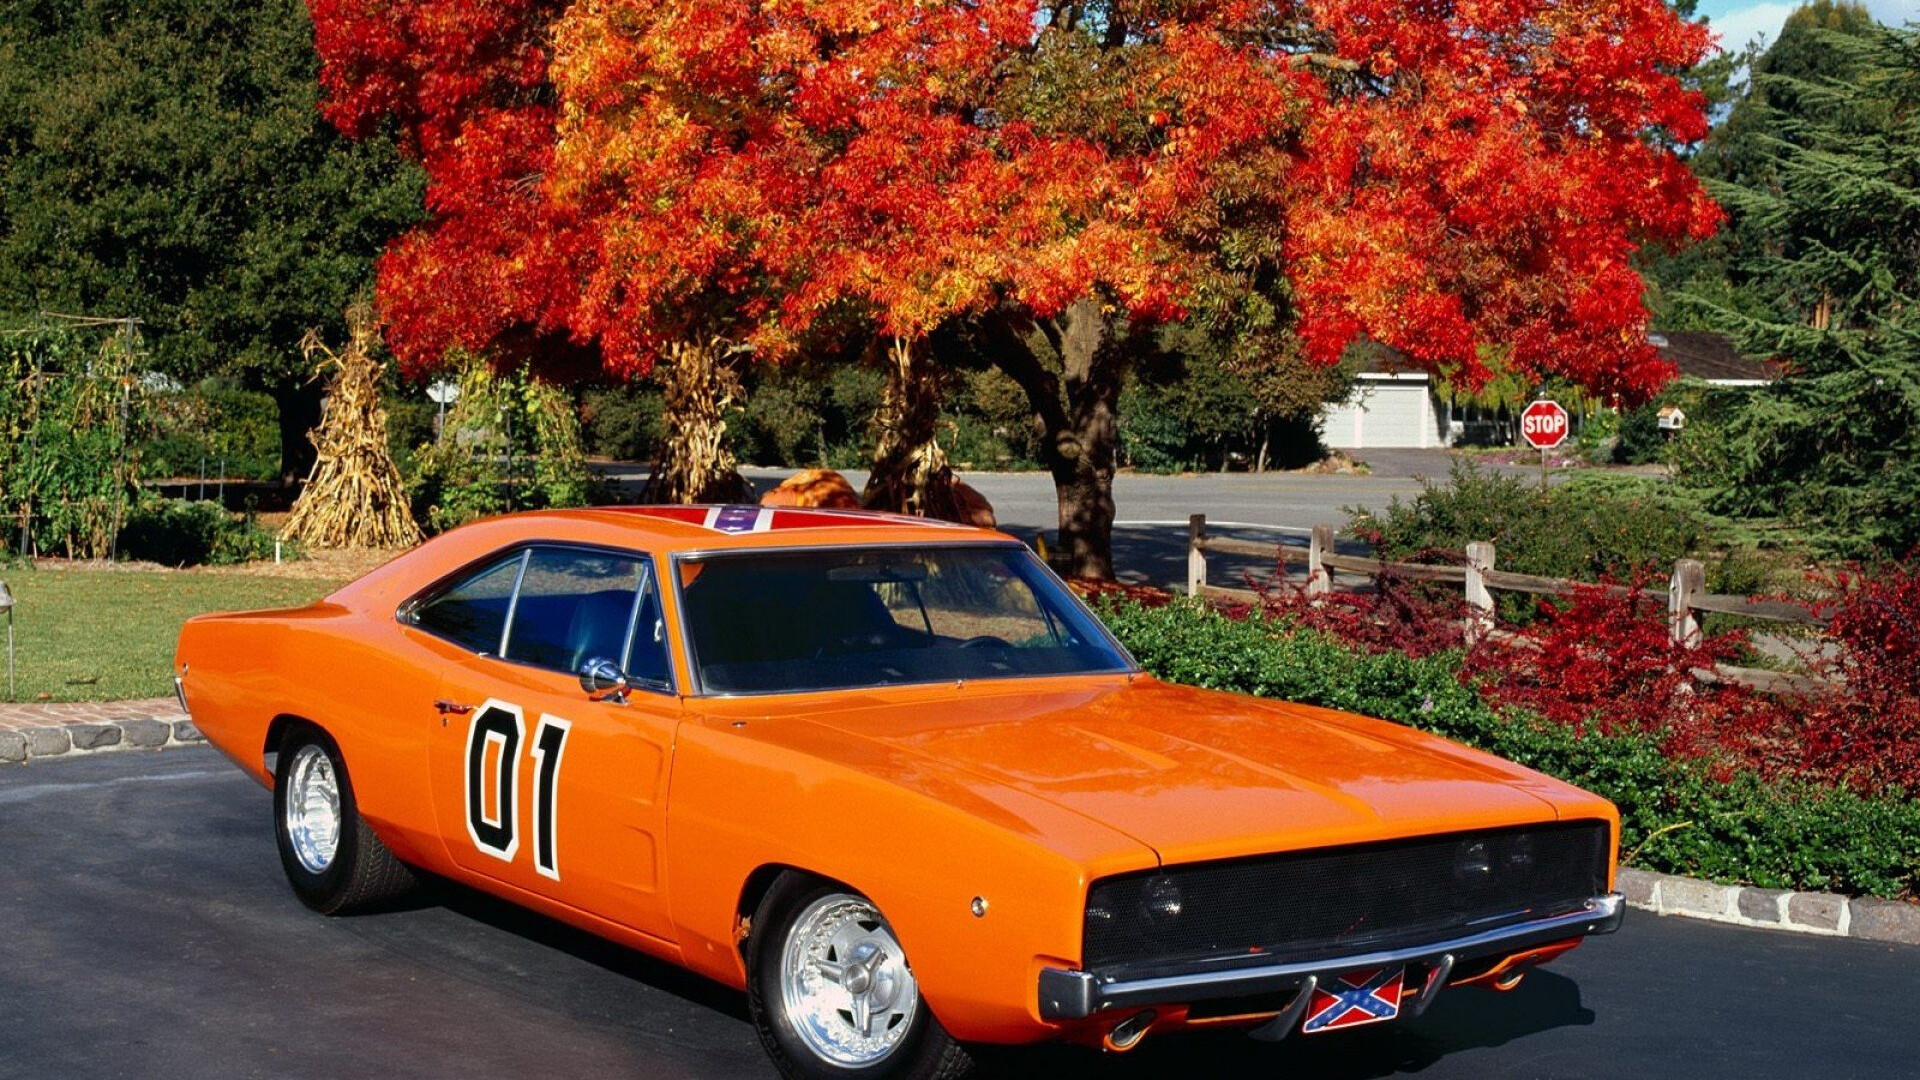 General Lee Car: Bubba Watson, Owner of LEE 1, Used in the show's first season, The star of the show and Warner Bros. 1920x1080 Full HD Background.